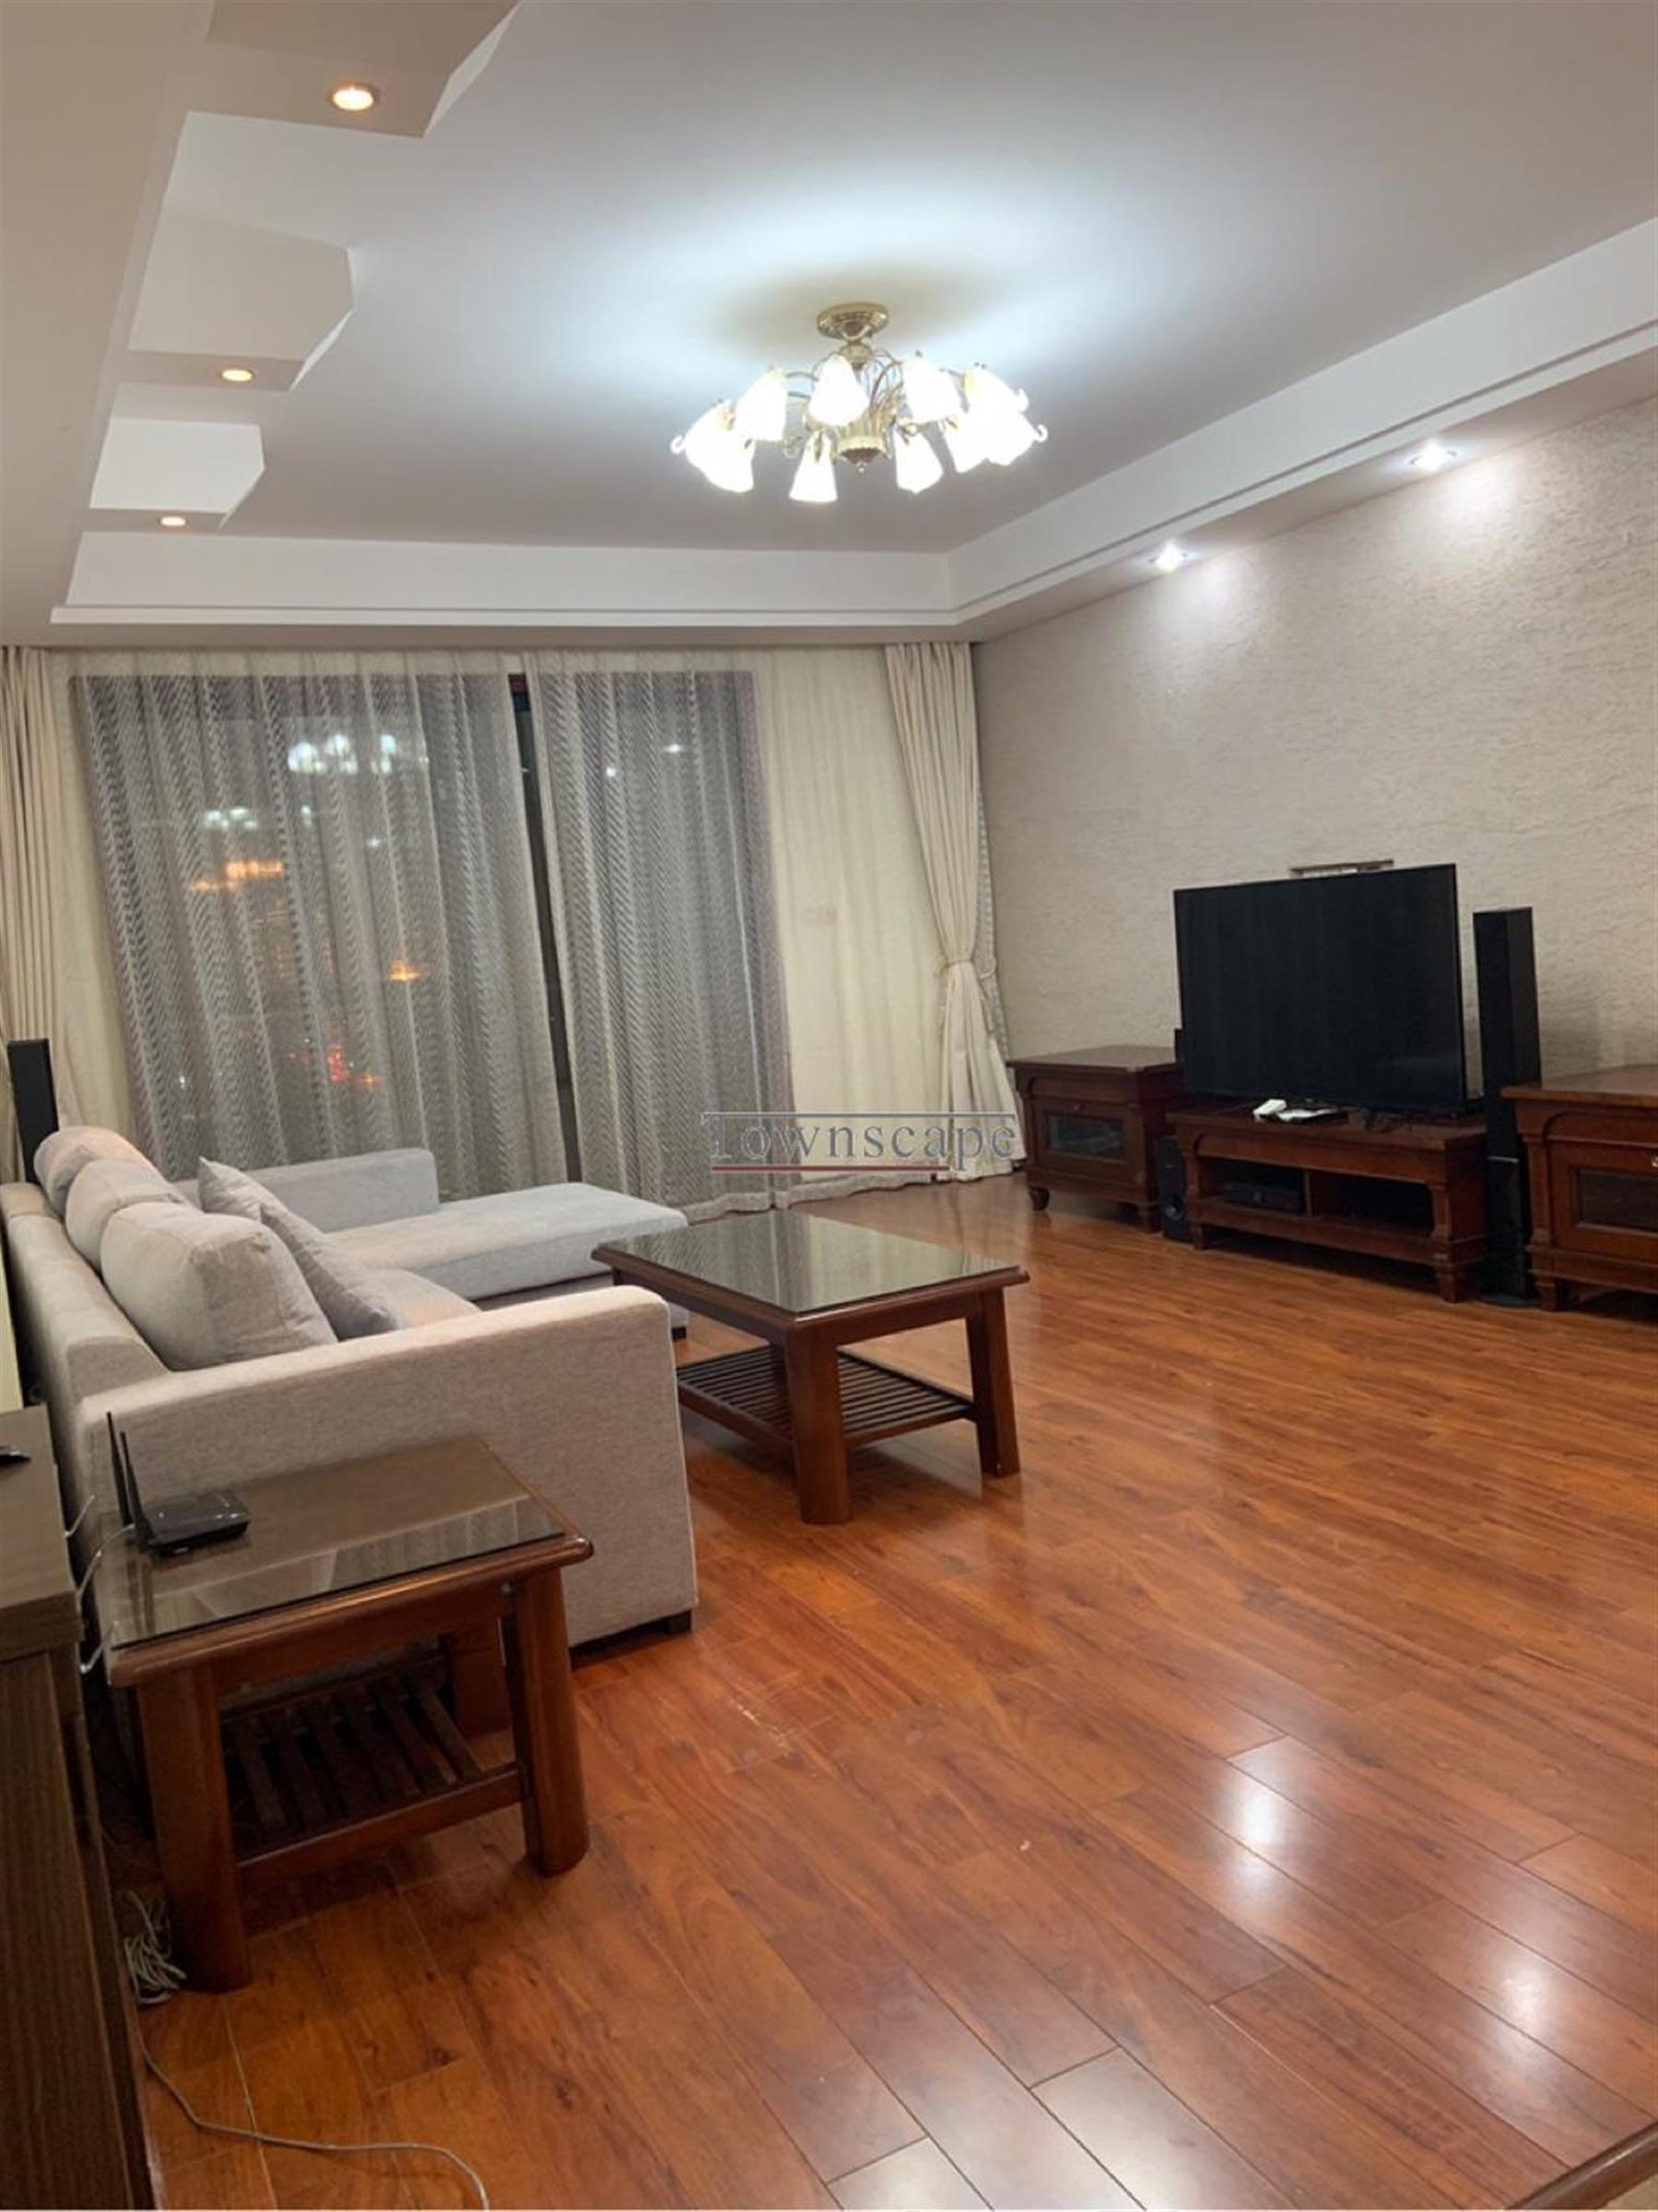 access to balcony Elegant 3BR Classically Furnished Gubei Apt for Rent in Shanghai